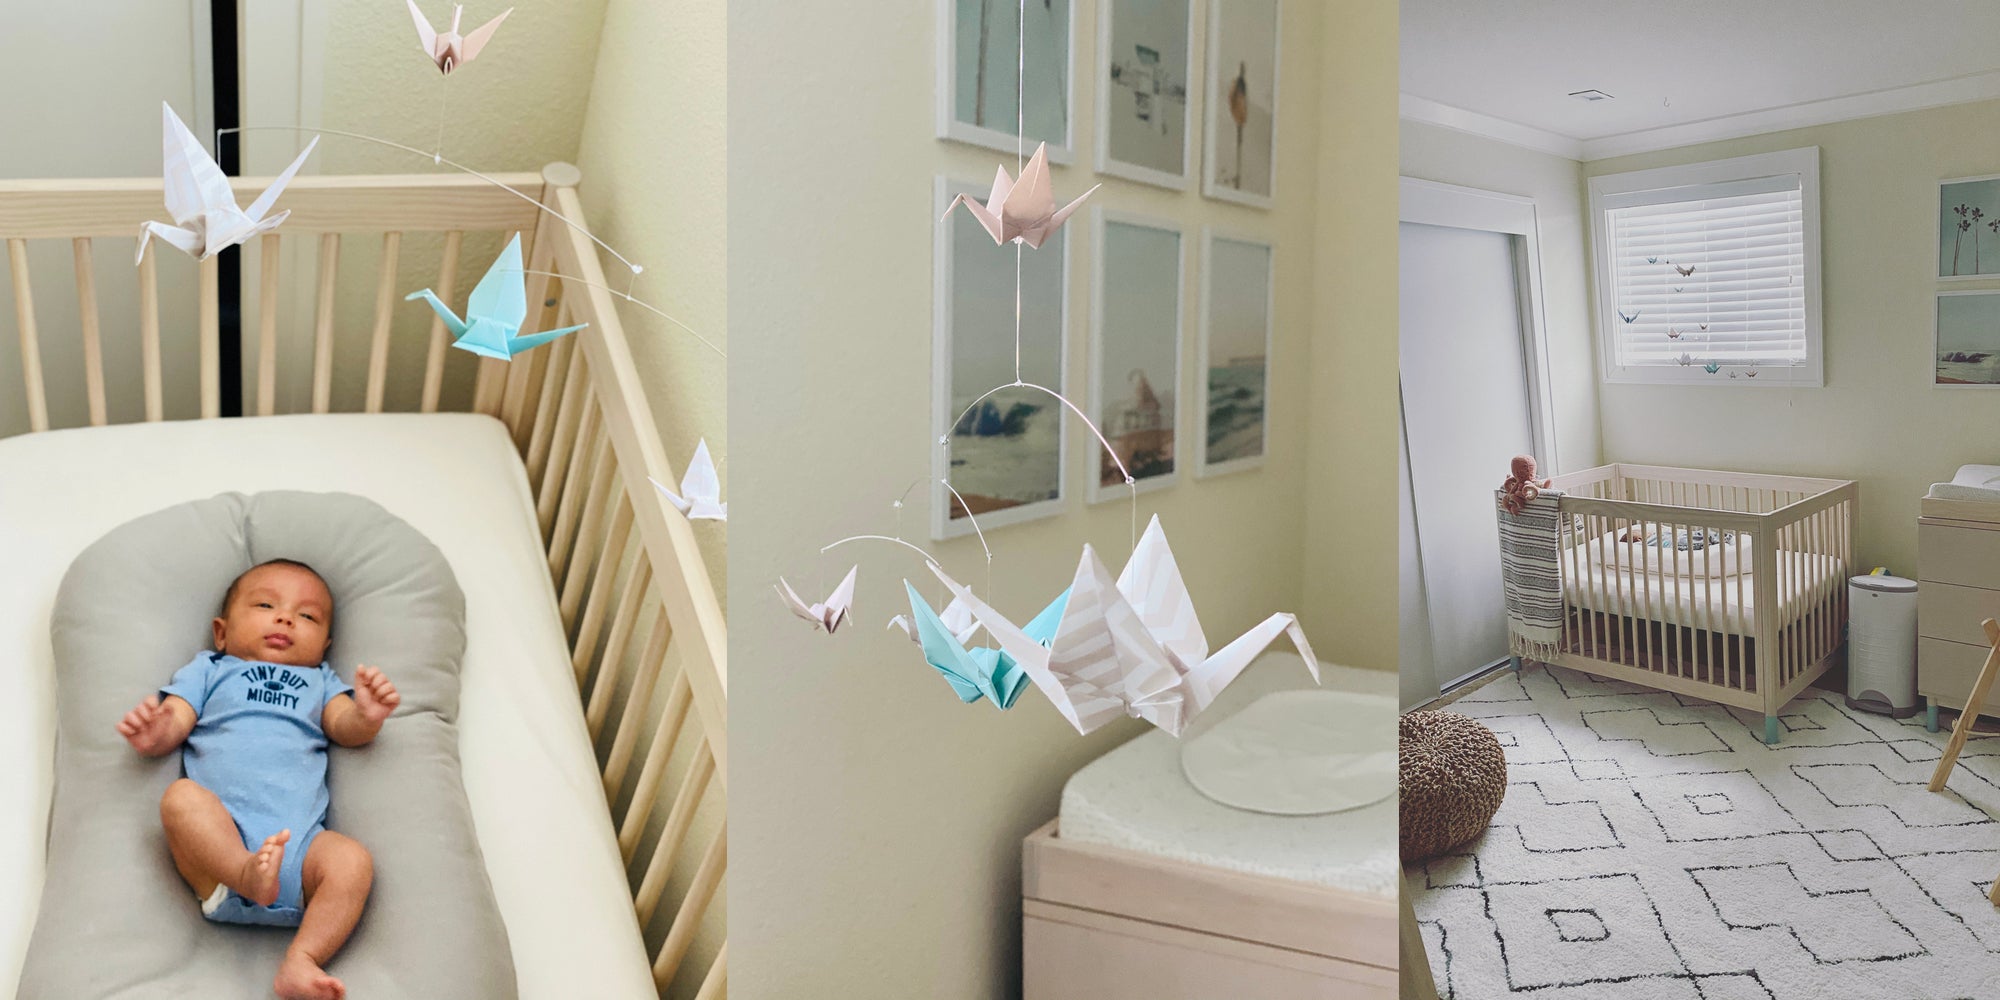 Beachy themed baby nursery with a soothing origami paper crane mobile hanging above the crib.